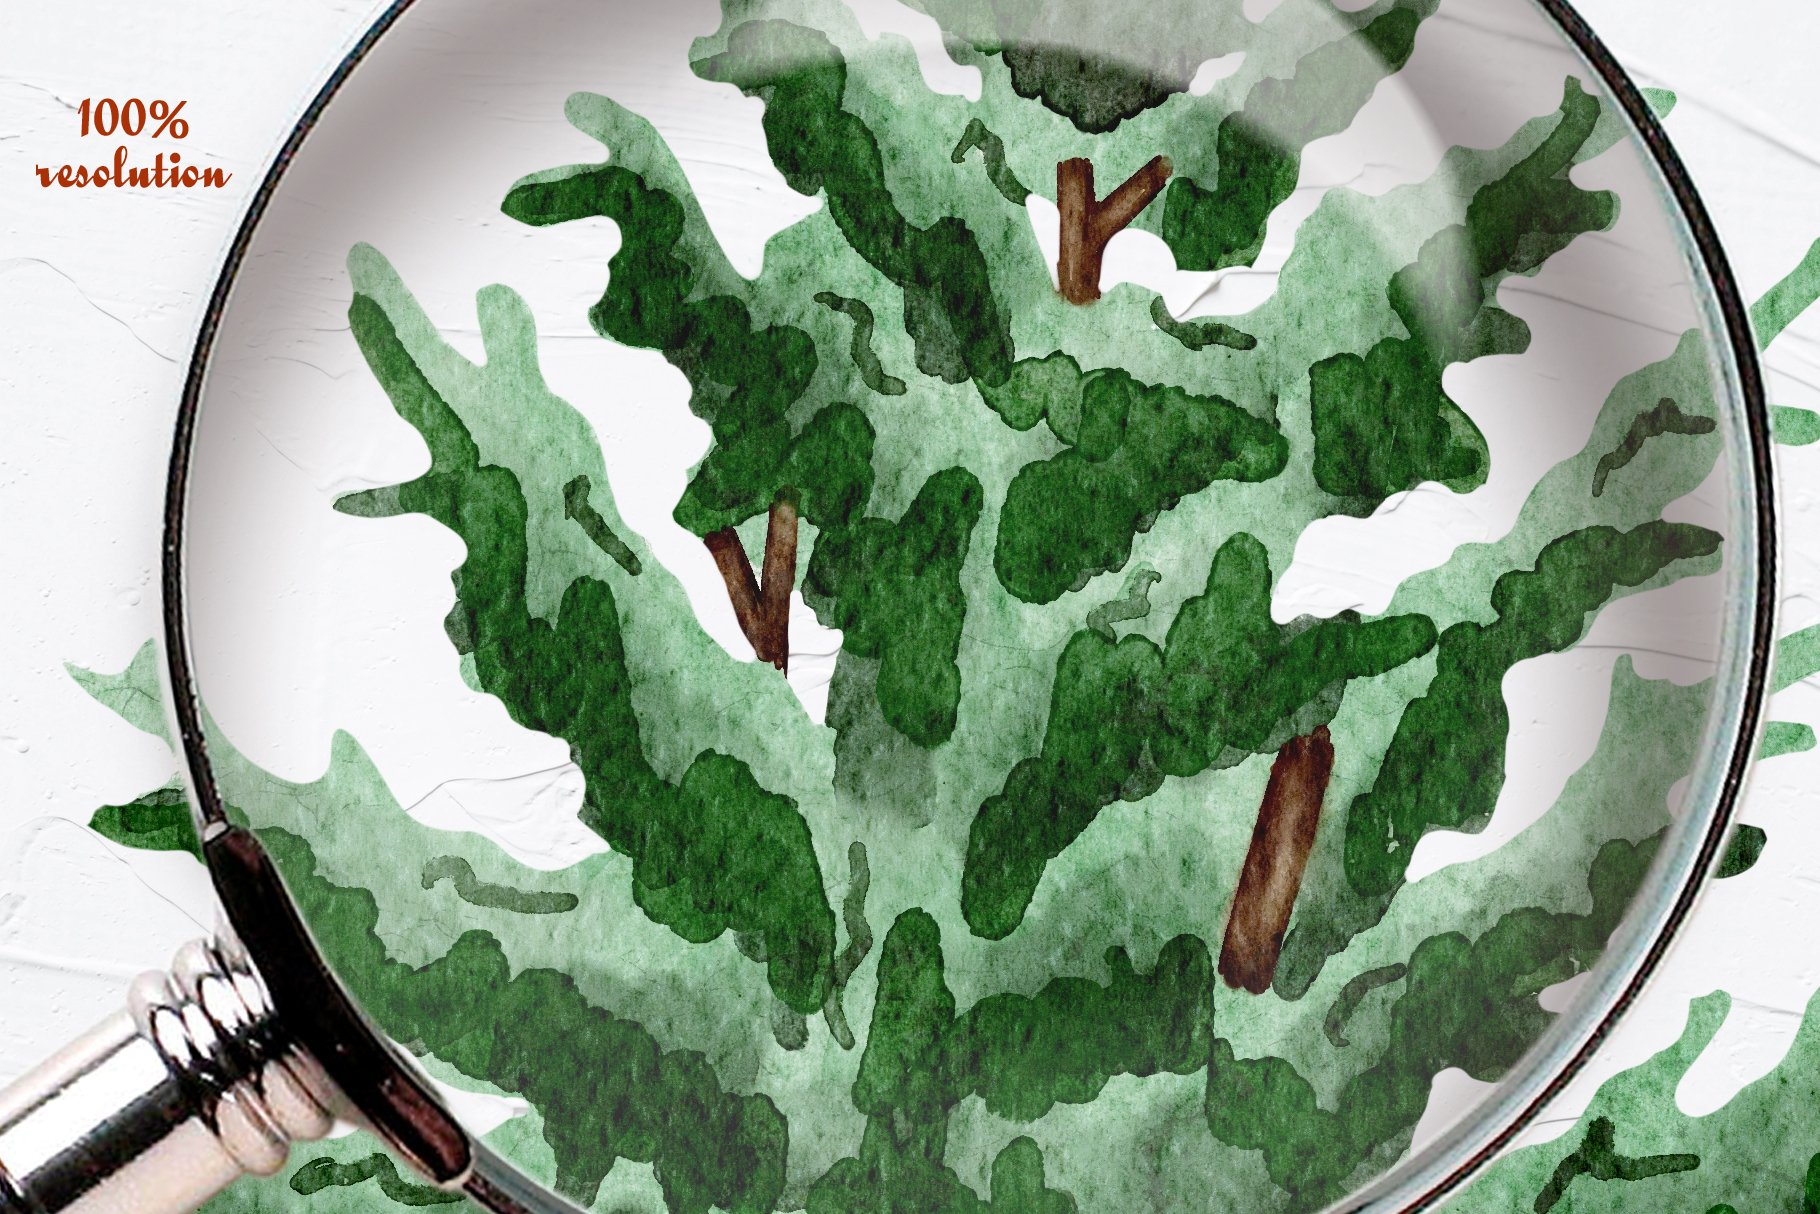 Drawing of a green plant on a plate under a magnifying glass.